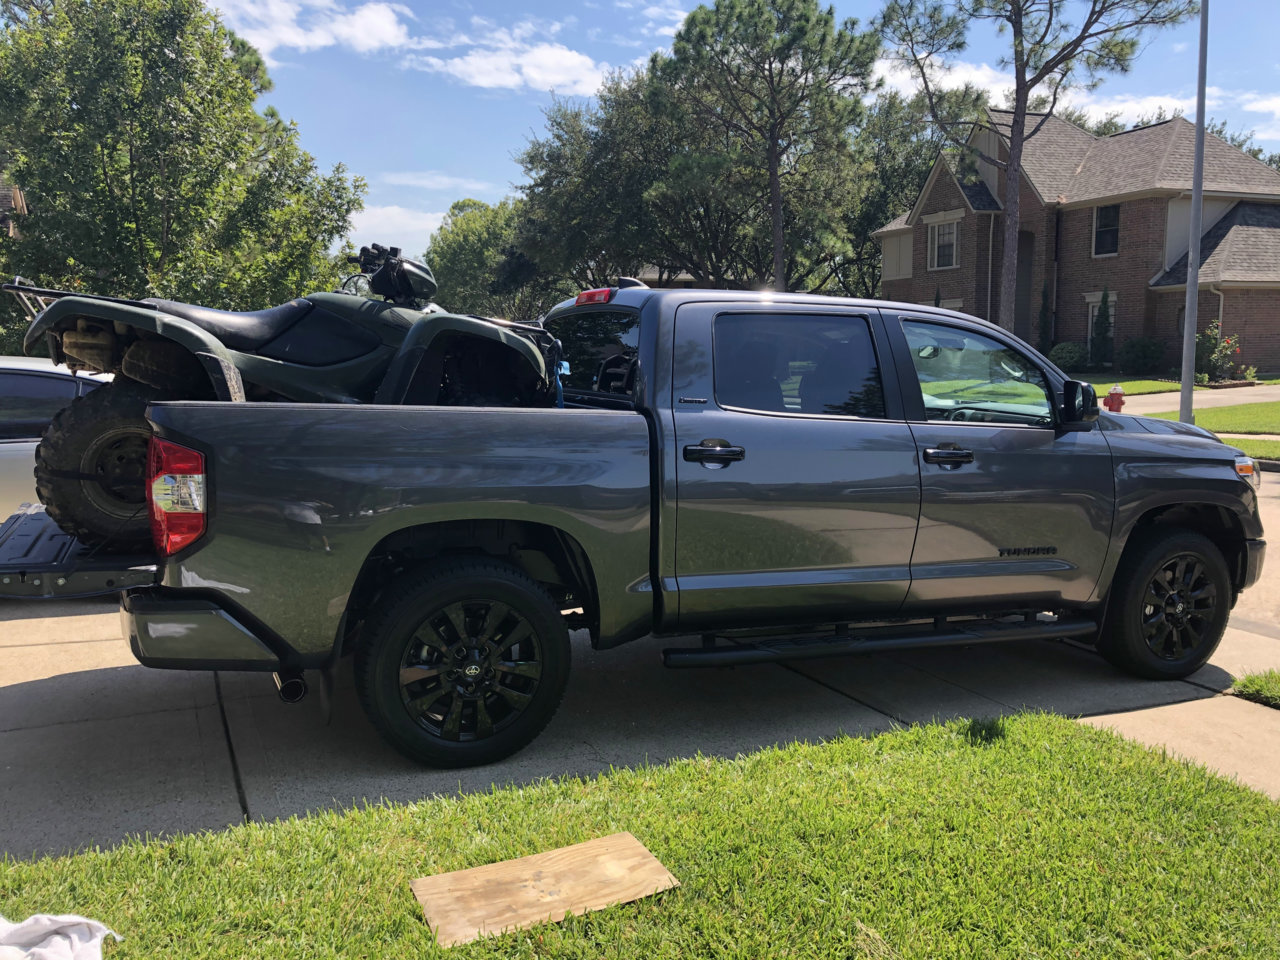 2021 Toyota Limited Tail Gate Loading | Toyota Tundra Forum